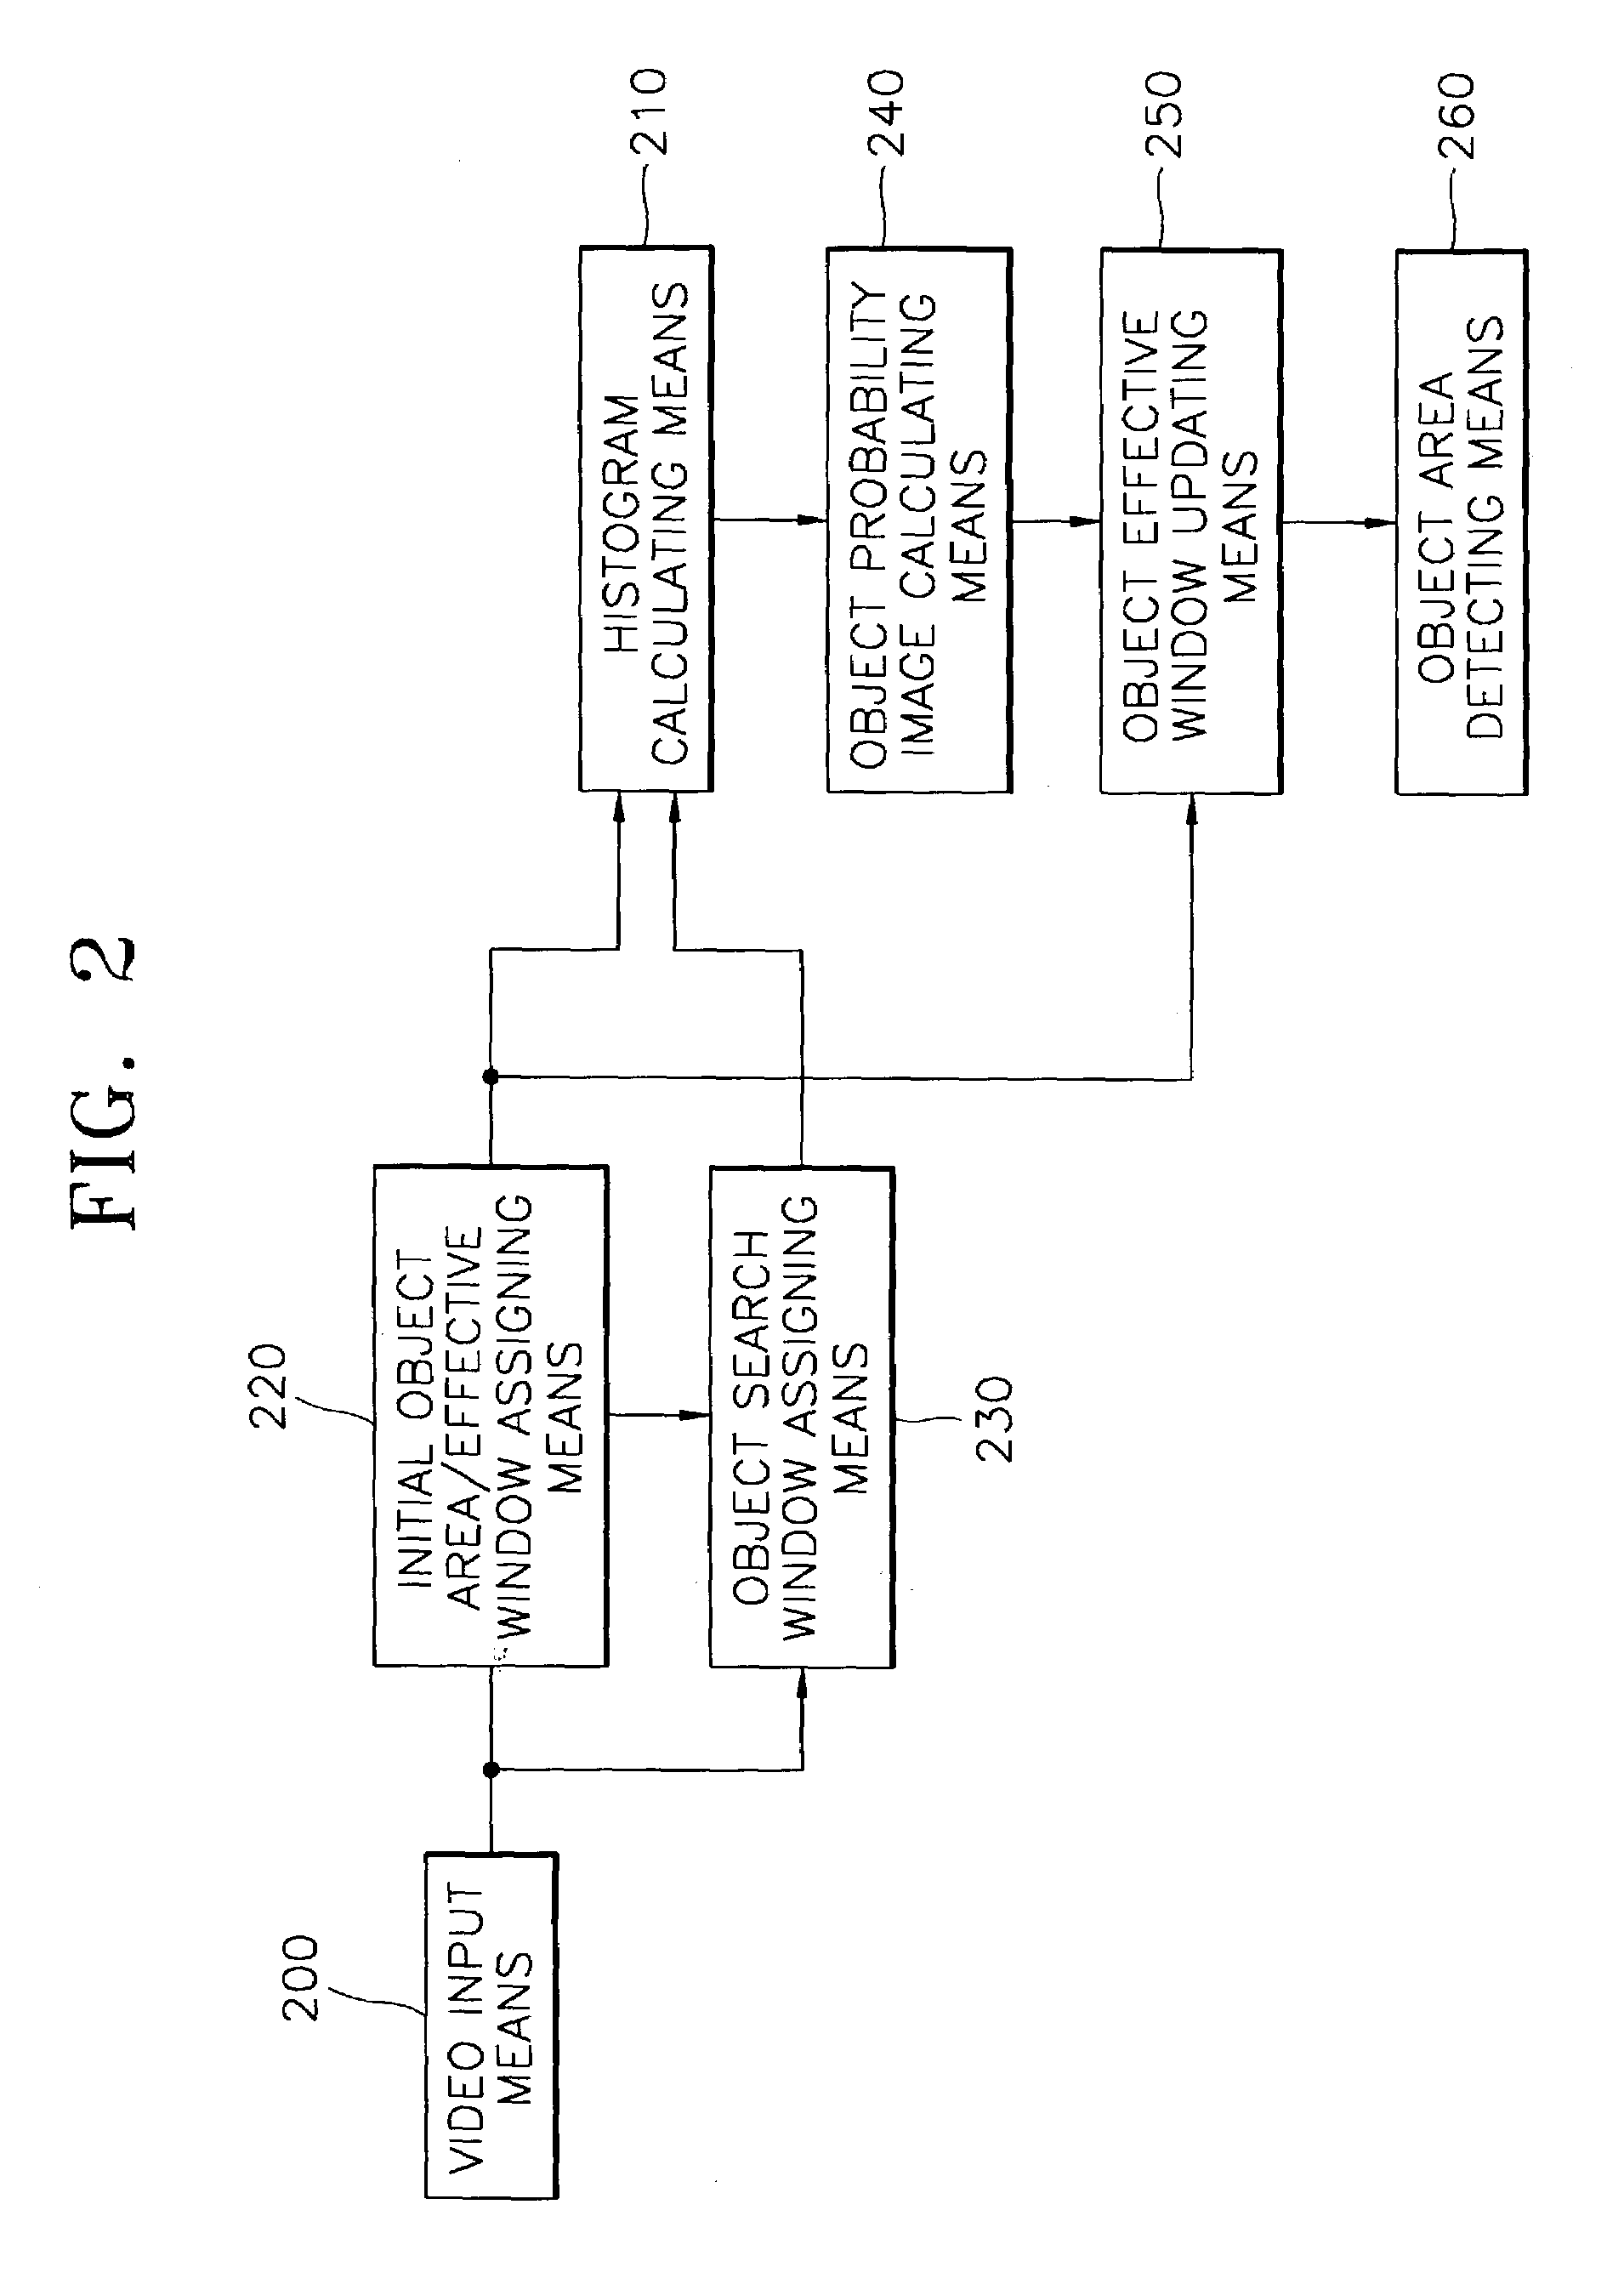 Method and apparatus for color-based object tracking in video sequences